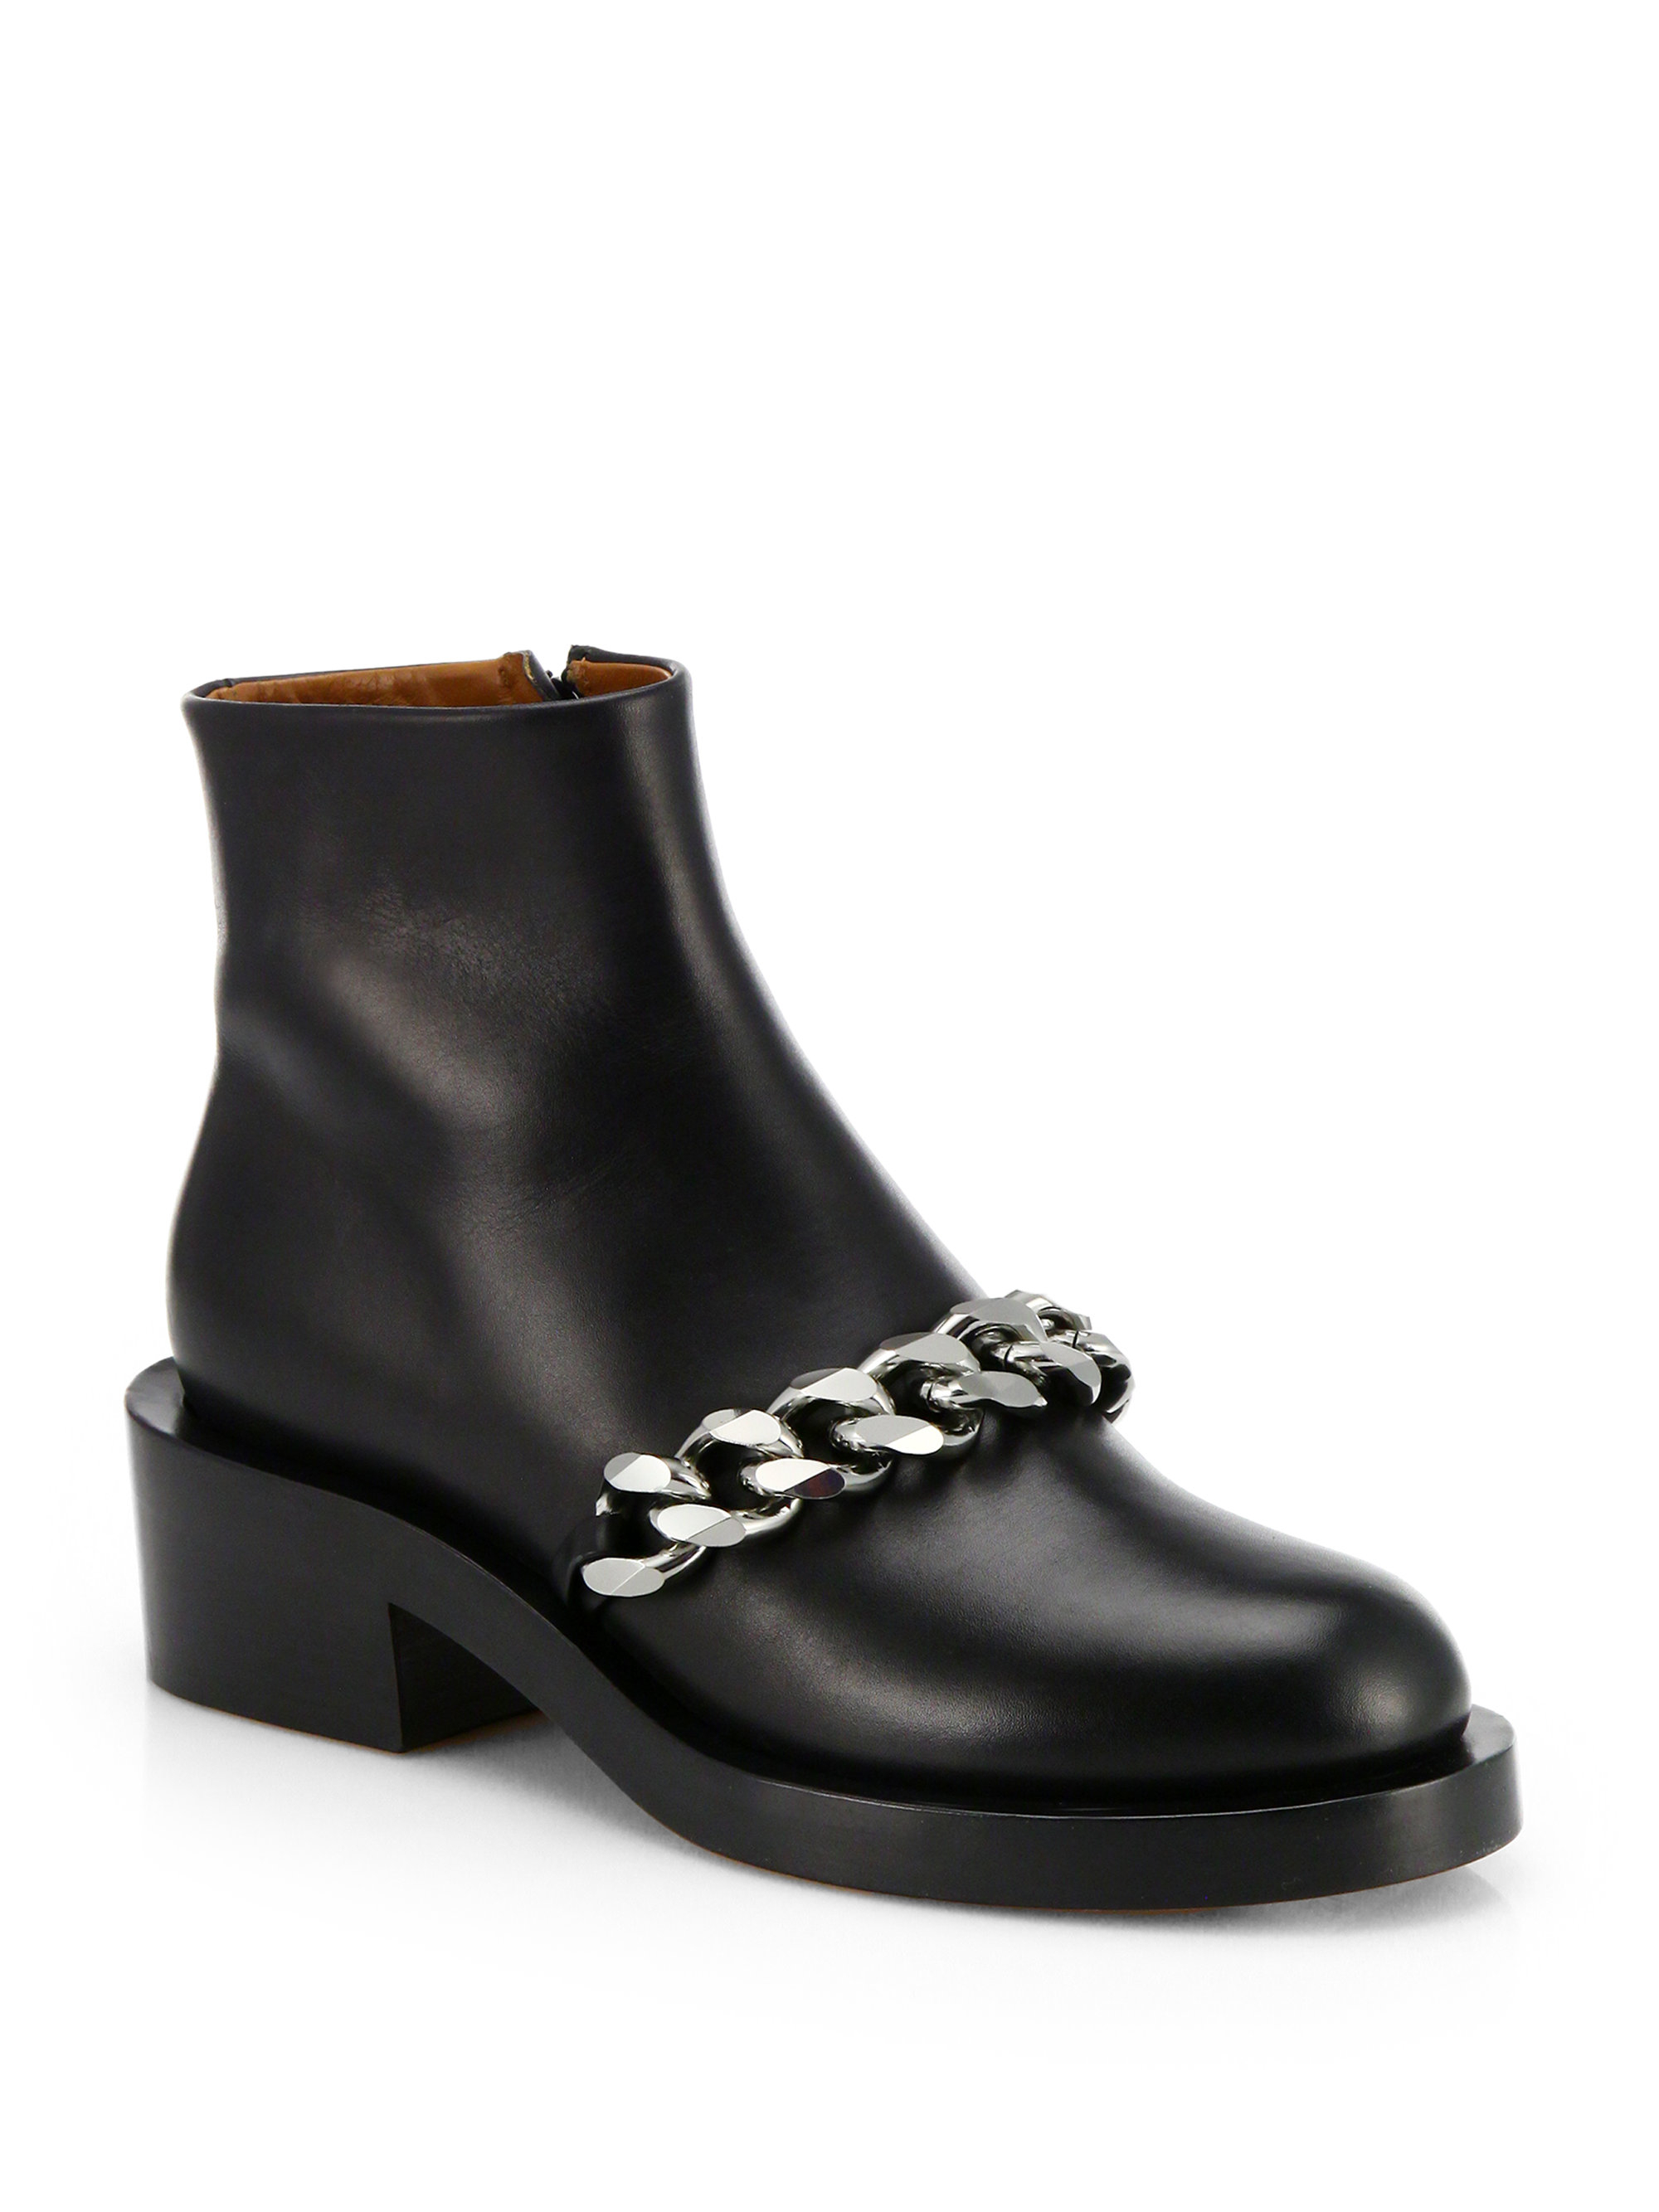 Lyst - Givenchy Laura Chained Leather Motorcycle Ankle Boots in Black